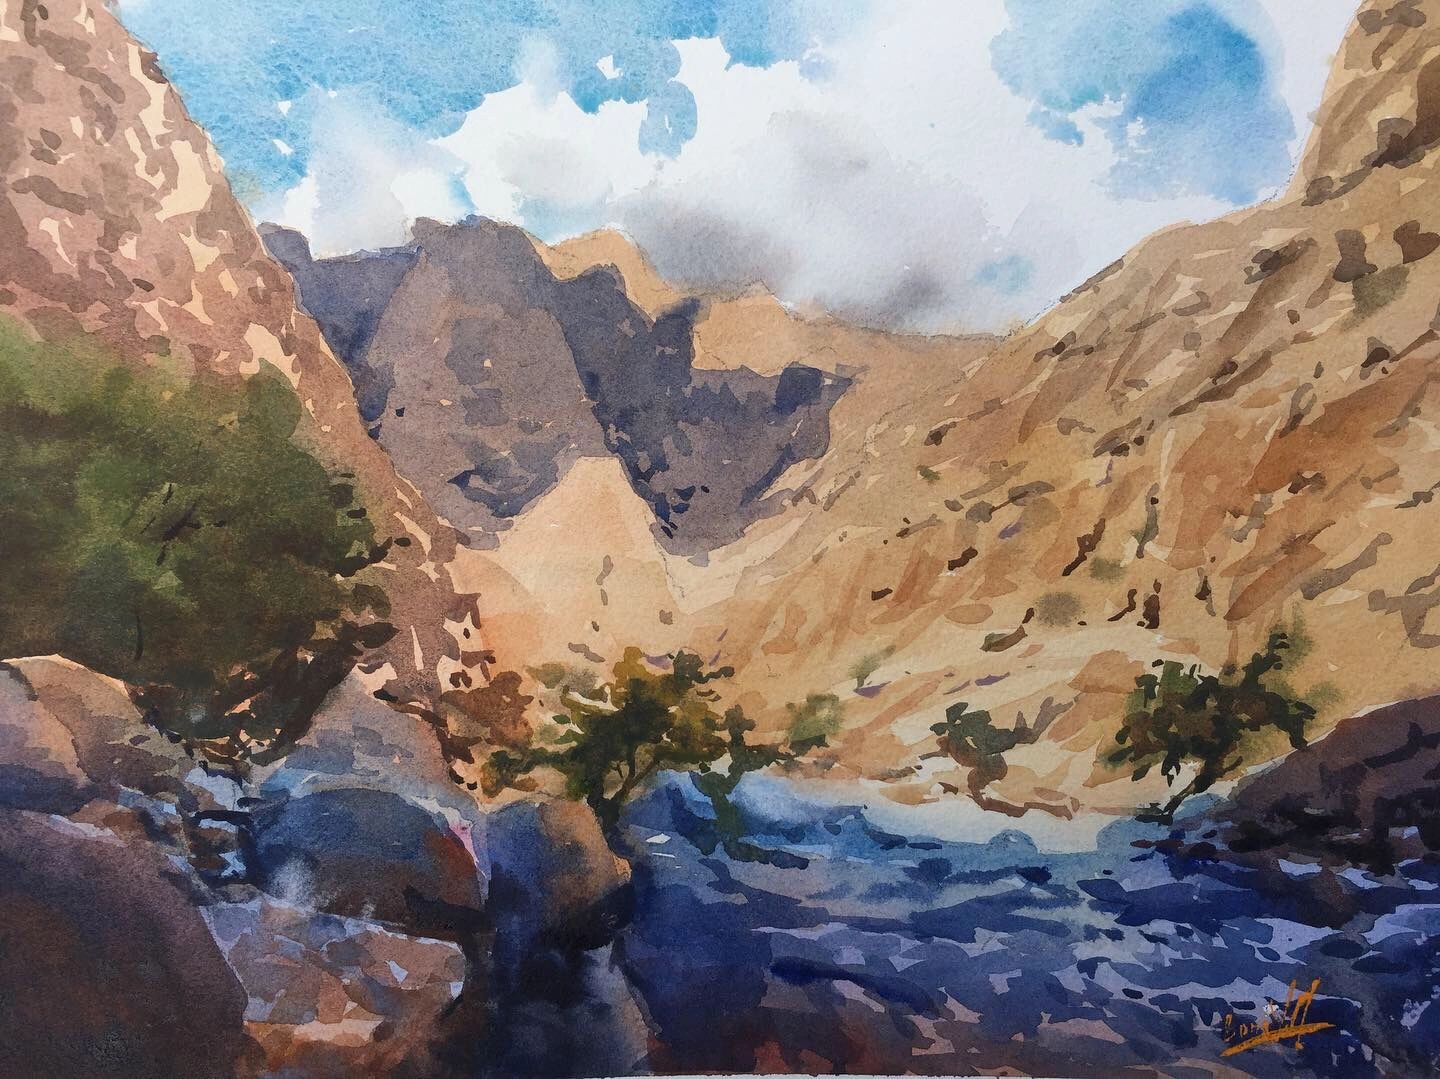 Light in valley - Arches 300 gsm rough paper
30 cm x 40 cm